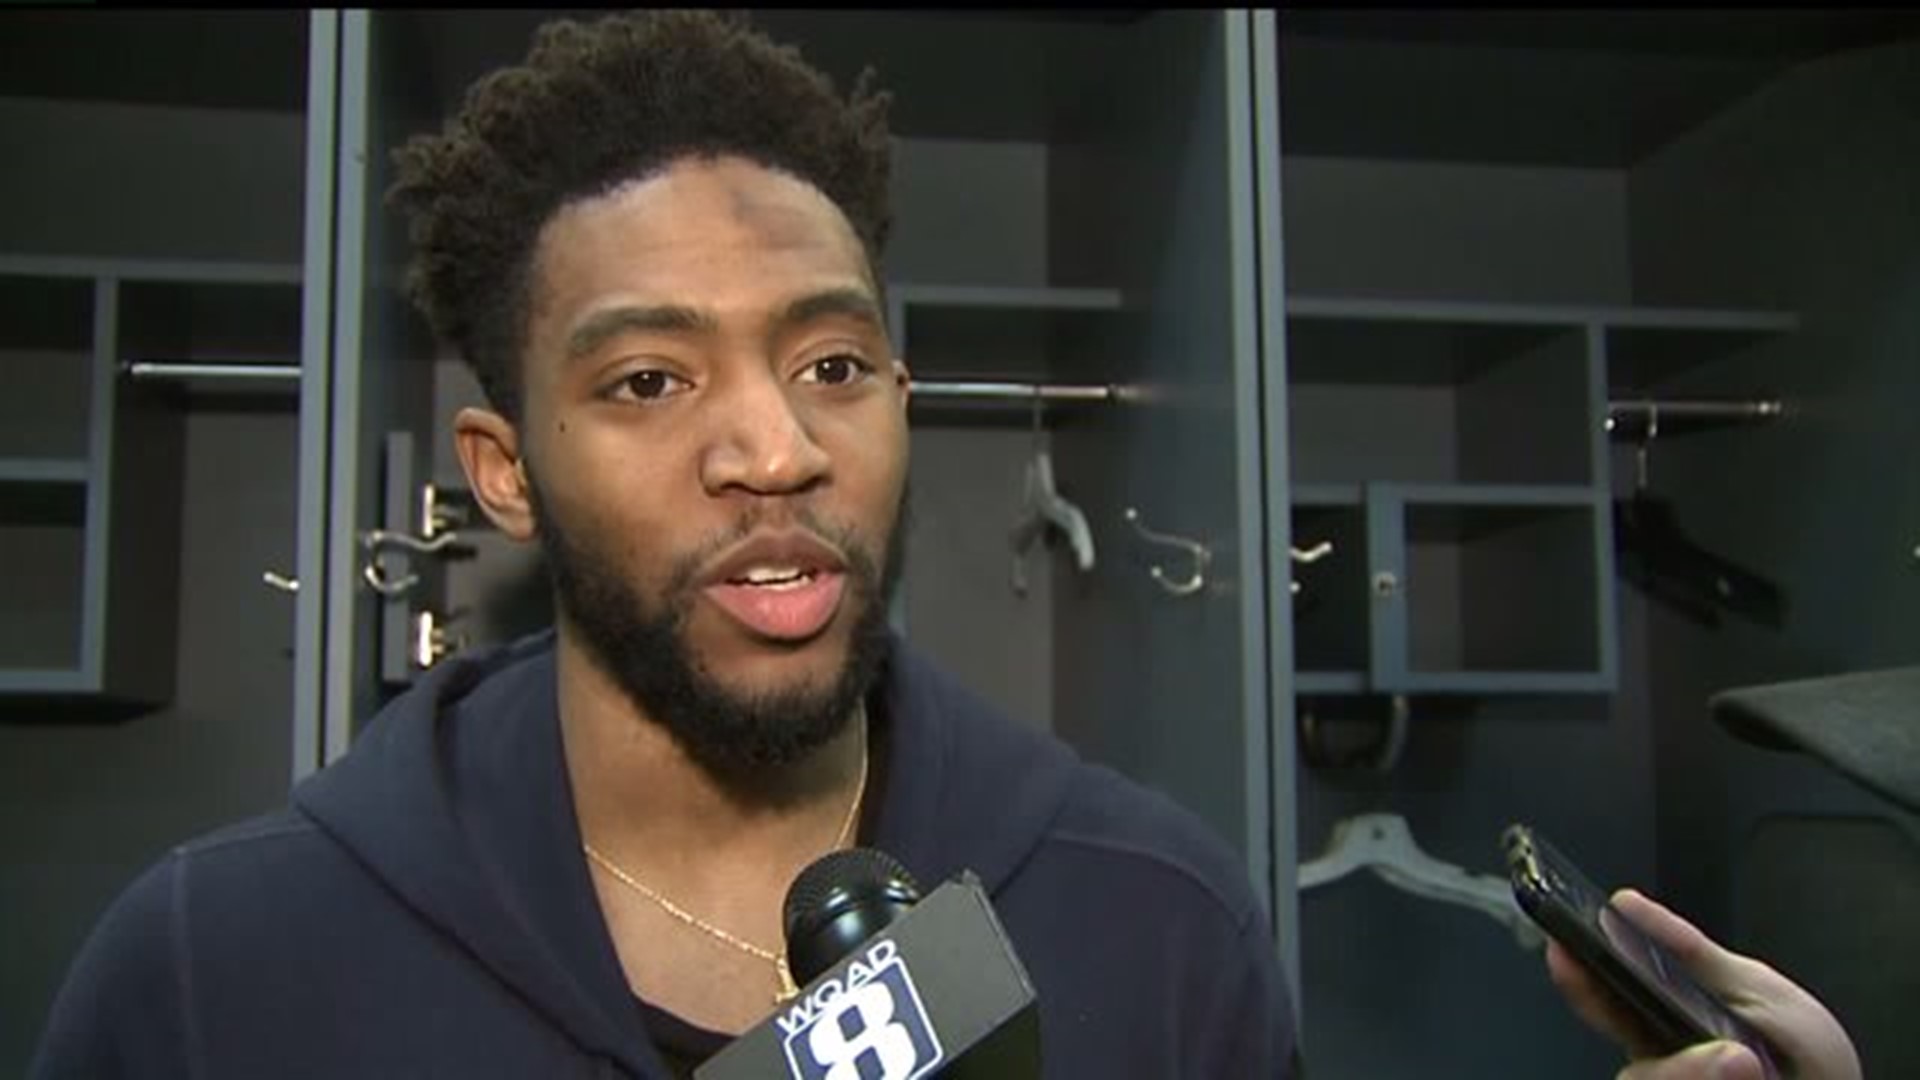 Chasson Randle making the most of his opportunity